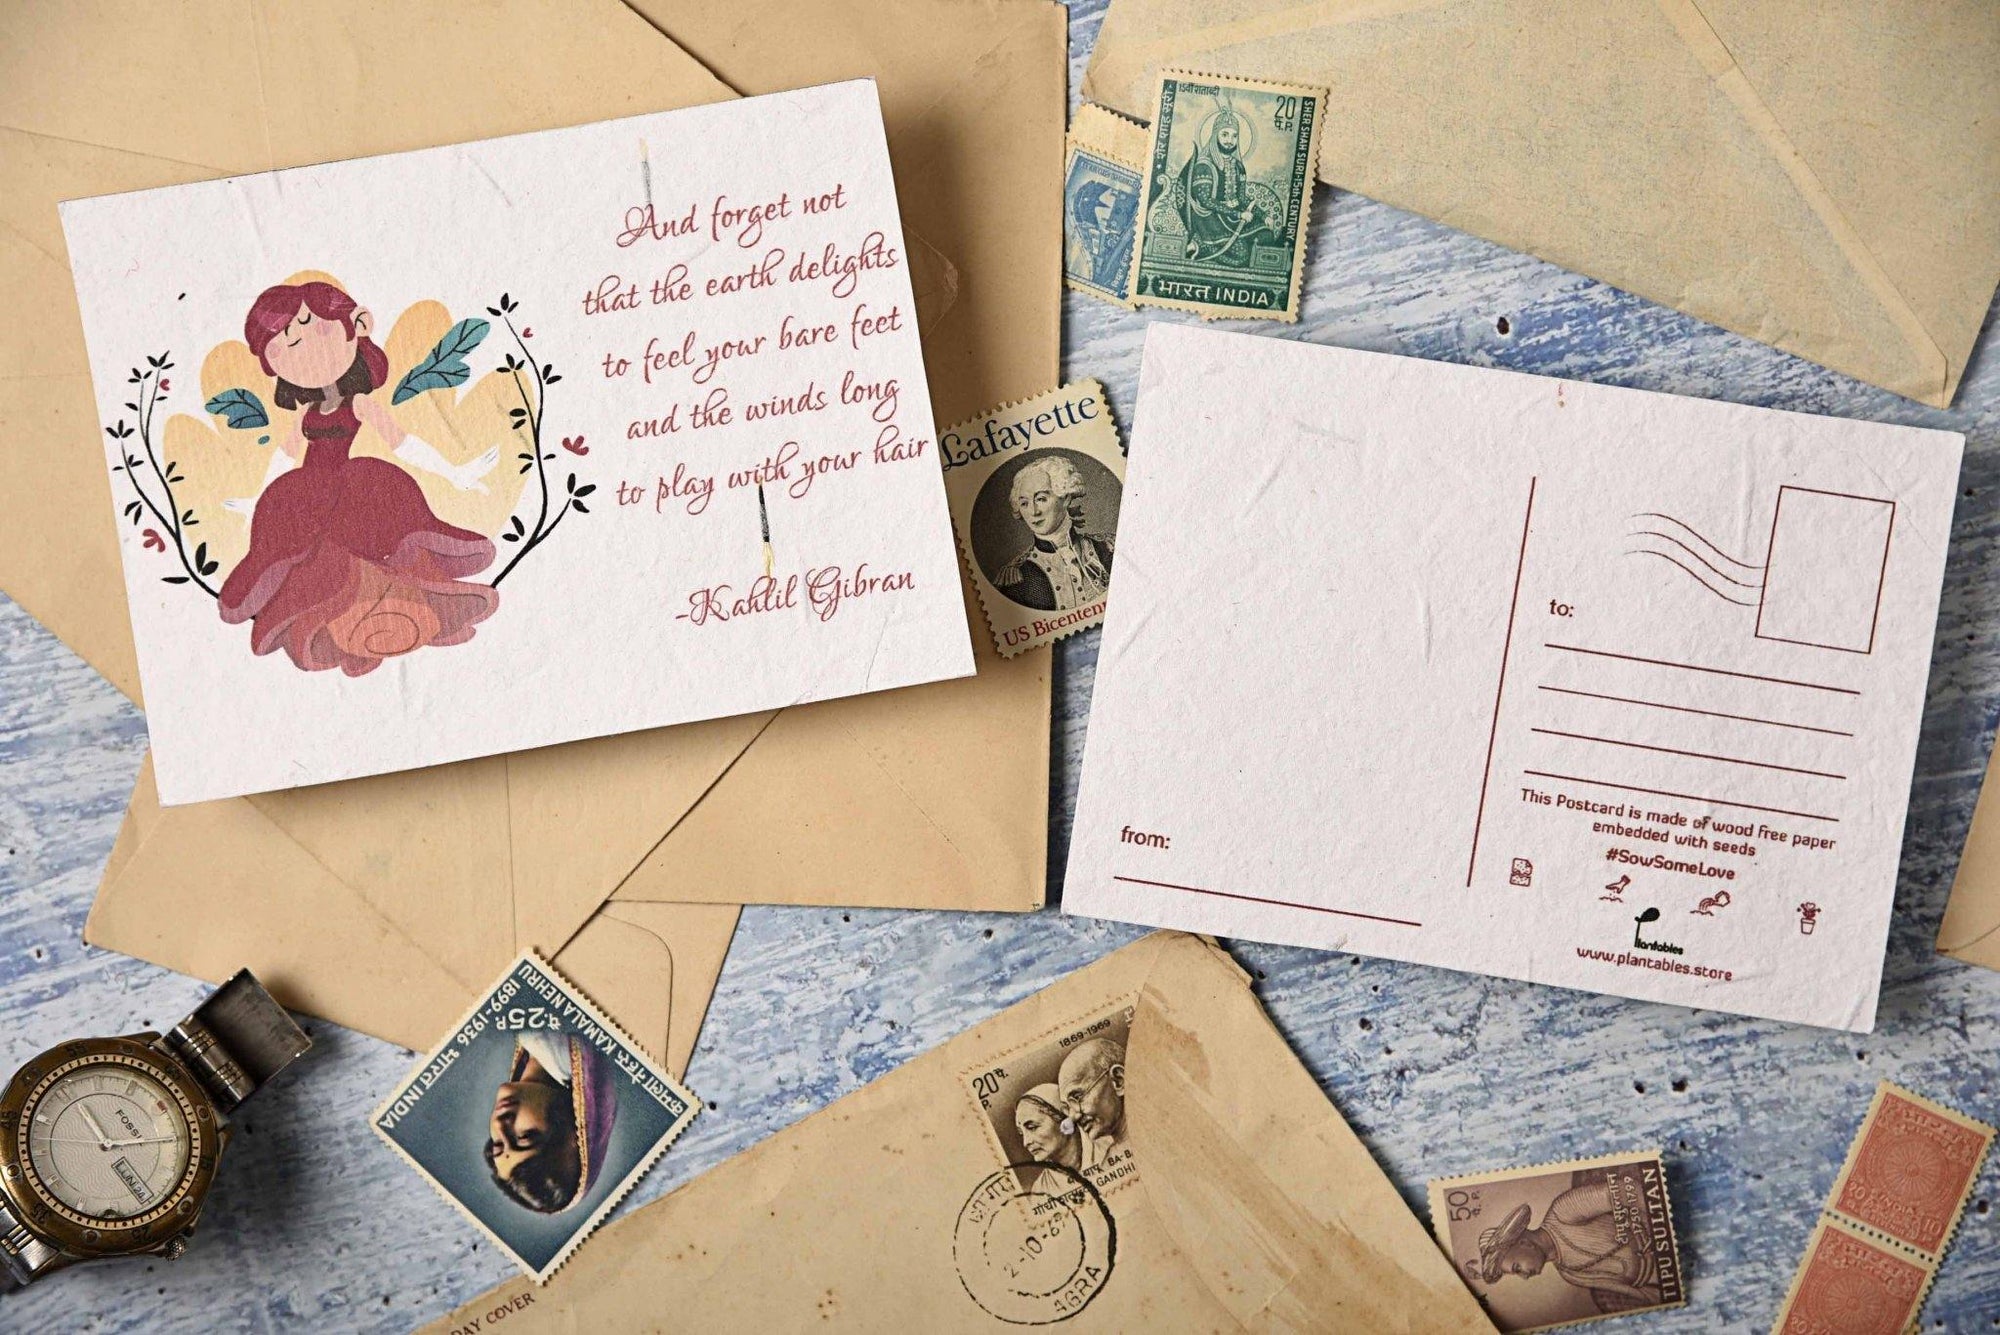 Beautiful Postcard designs with handmade seed paper